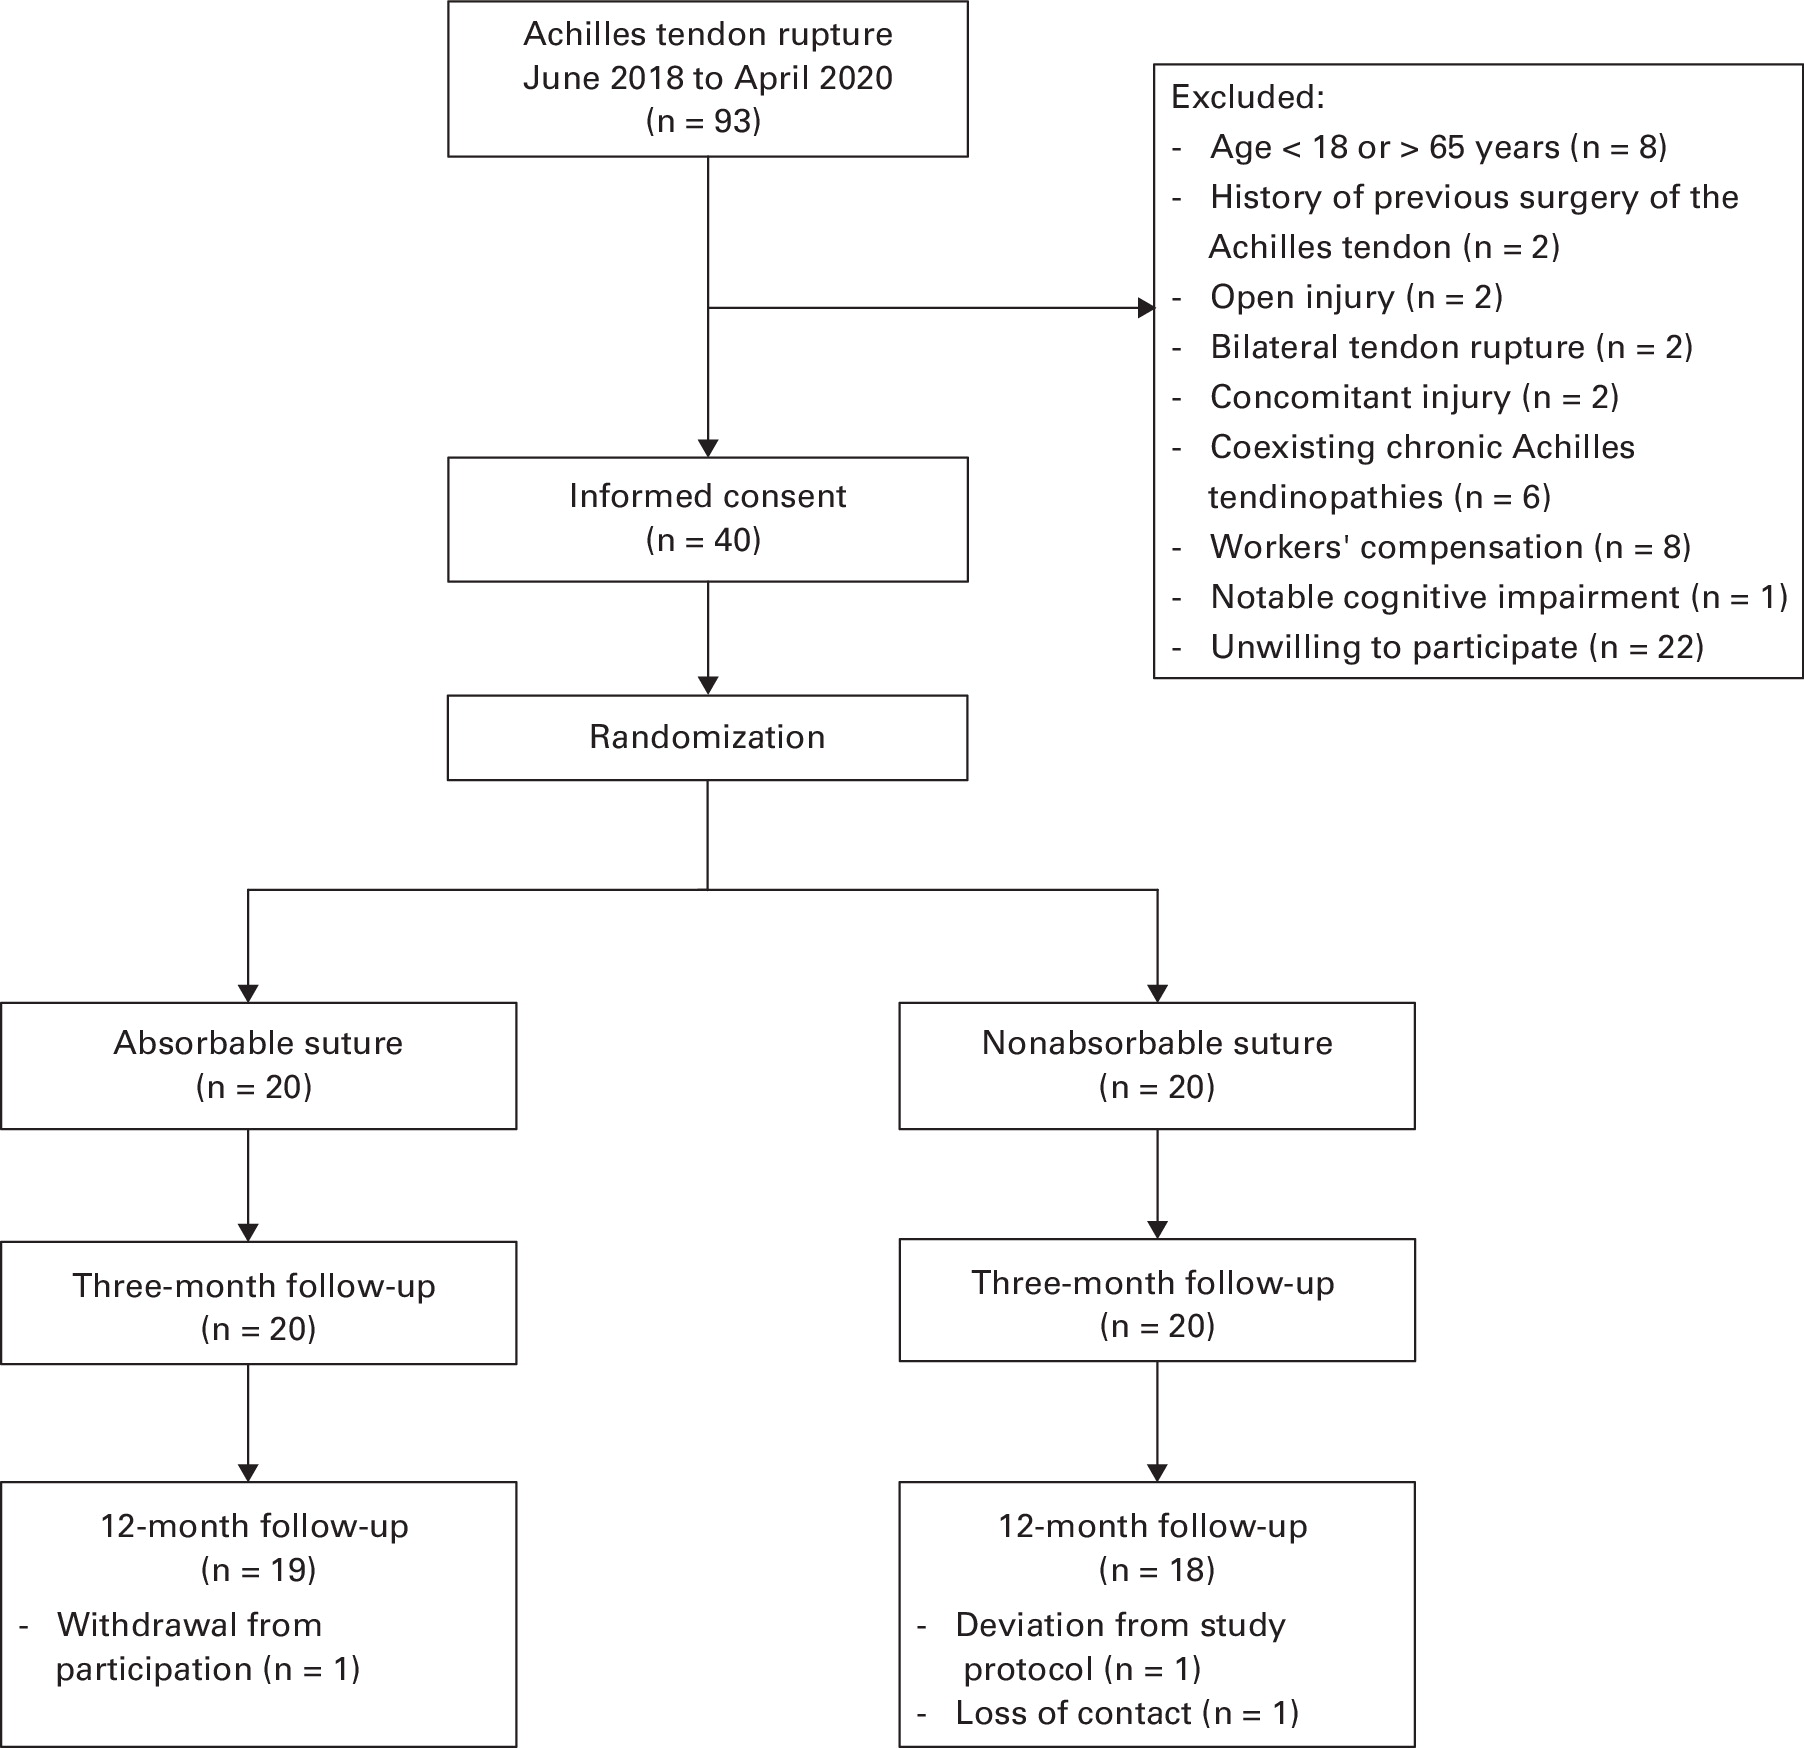 Absorbable versus nonabsorbable sutures for the Krackow suture repair of acute Achilles tendon rupture: a prospective randomized controlled trial